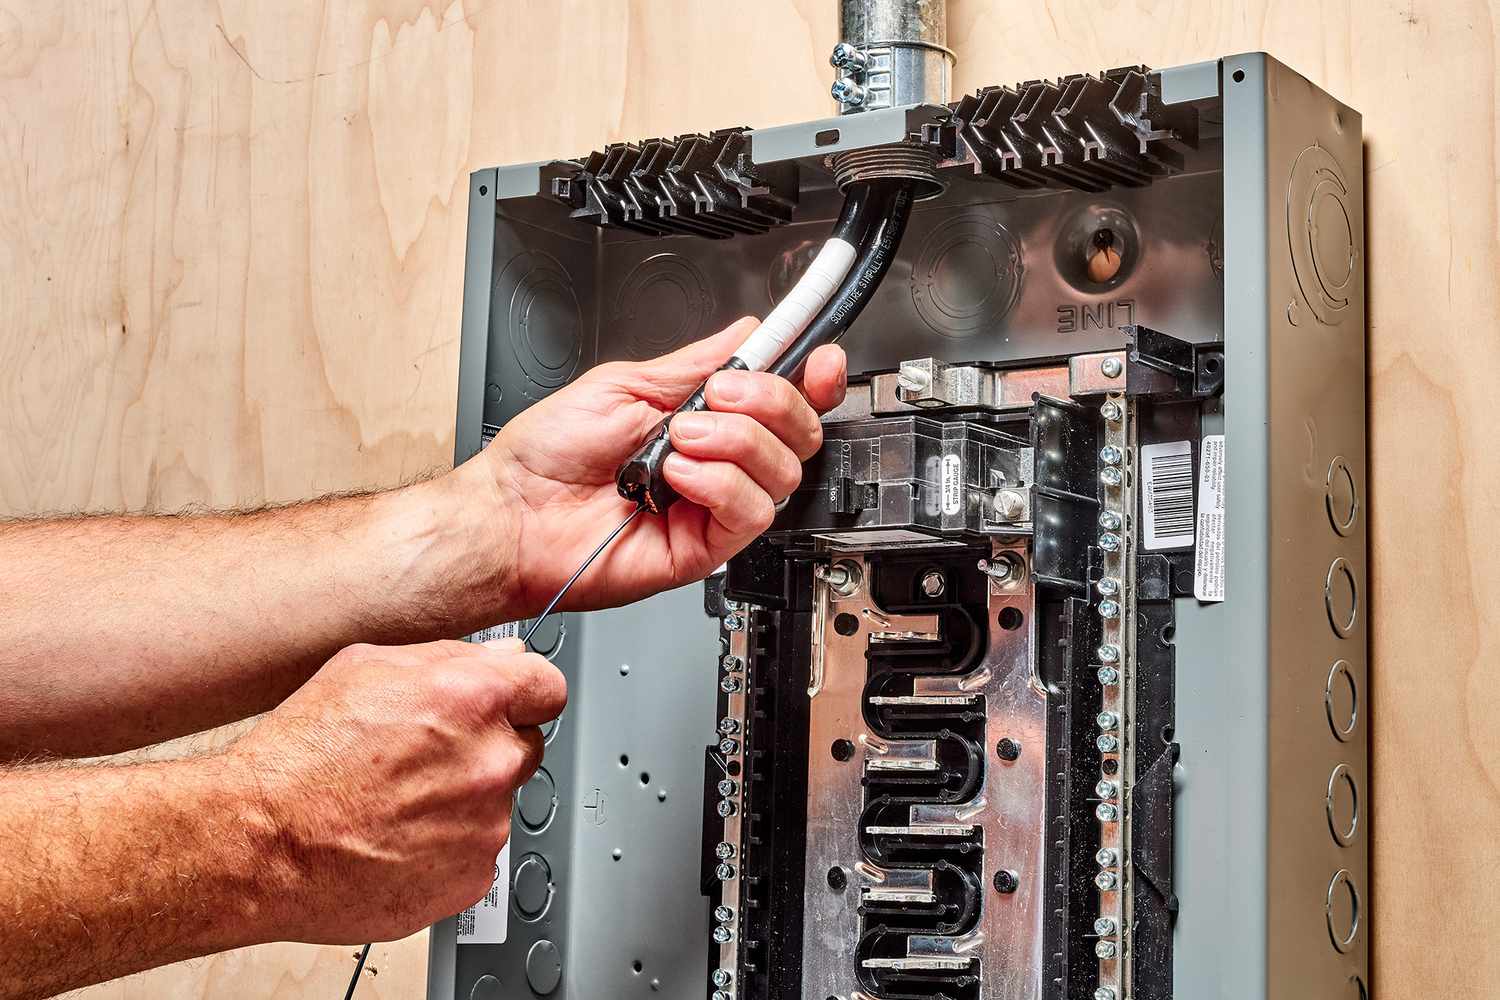 Electrical Panel Installation and Upgrades | Supply Master Handyman Service Ghana Handyman Service Buy Tools hardware Building materials